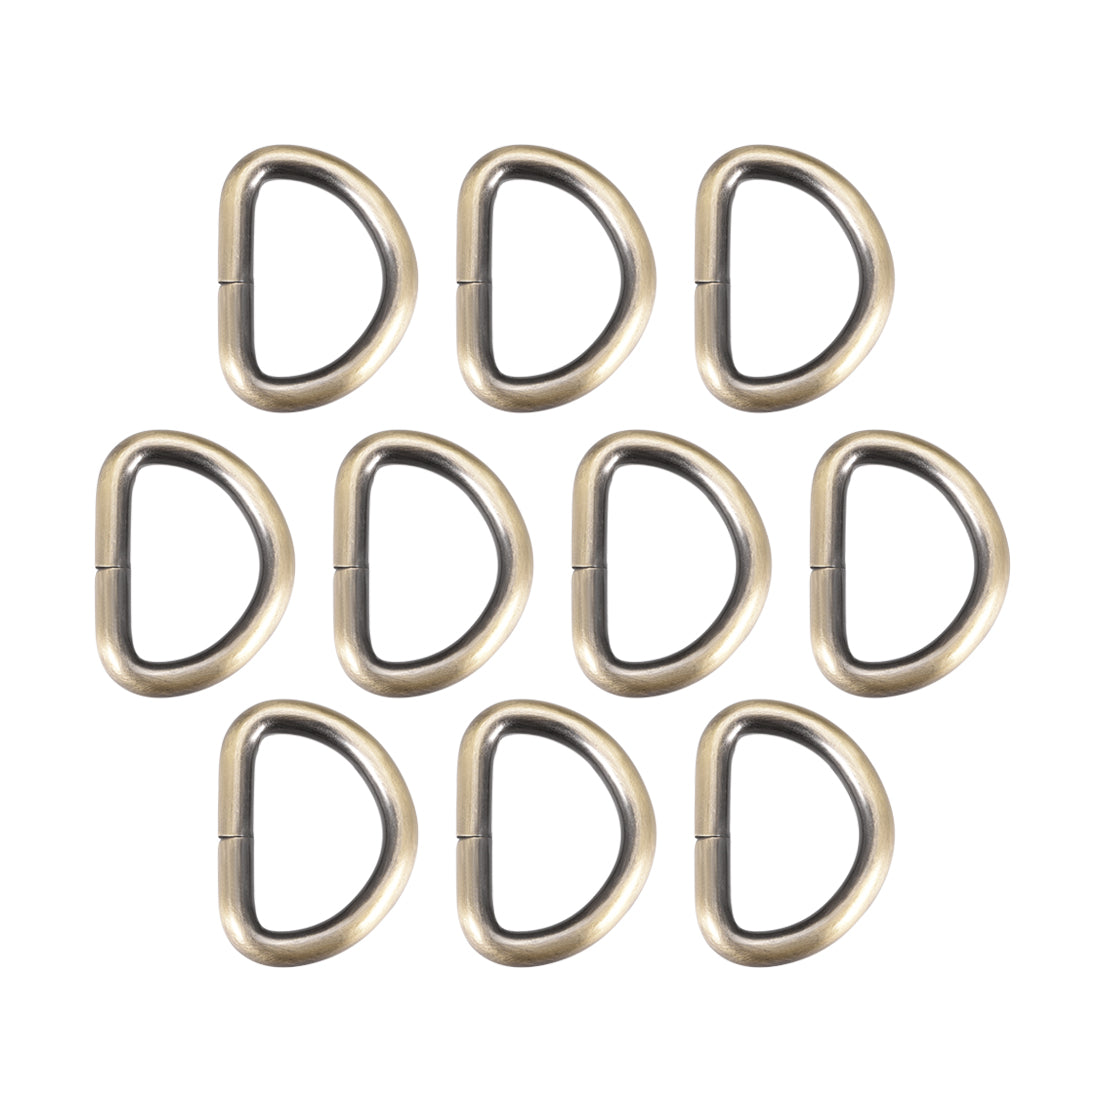 uxcell Uxcell 10 Pcs D Ring Buckle 1 Inch Metal Semi-Circular D-Rings Bronze Tone for Hardware Bags Belts Craft DIY Accessories